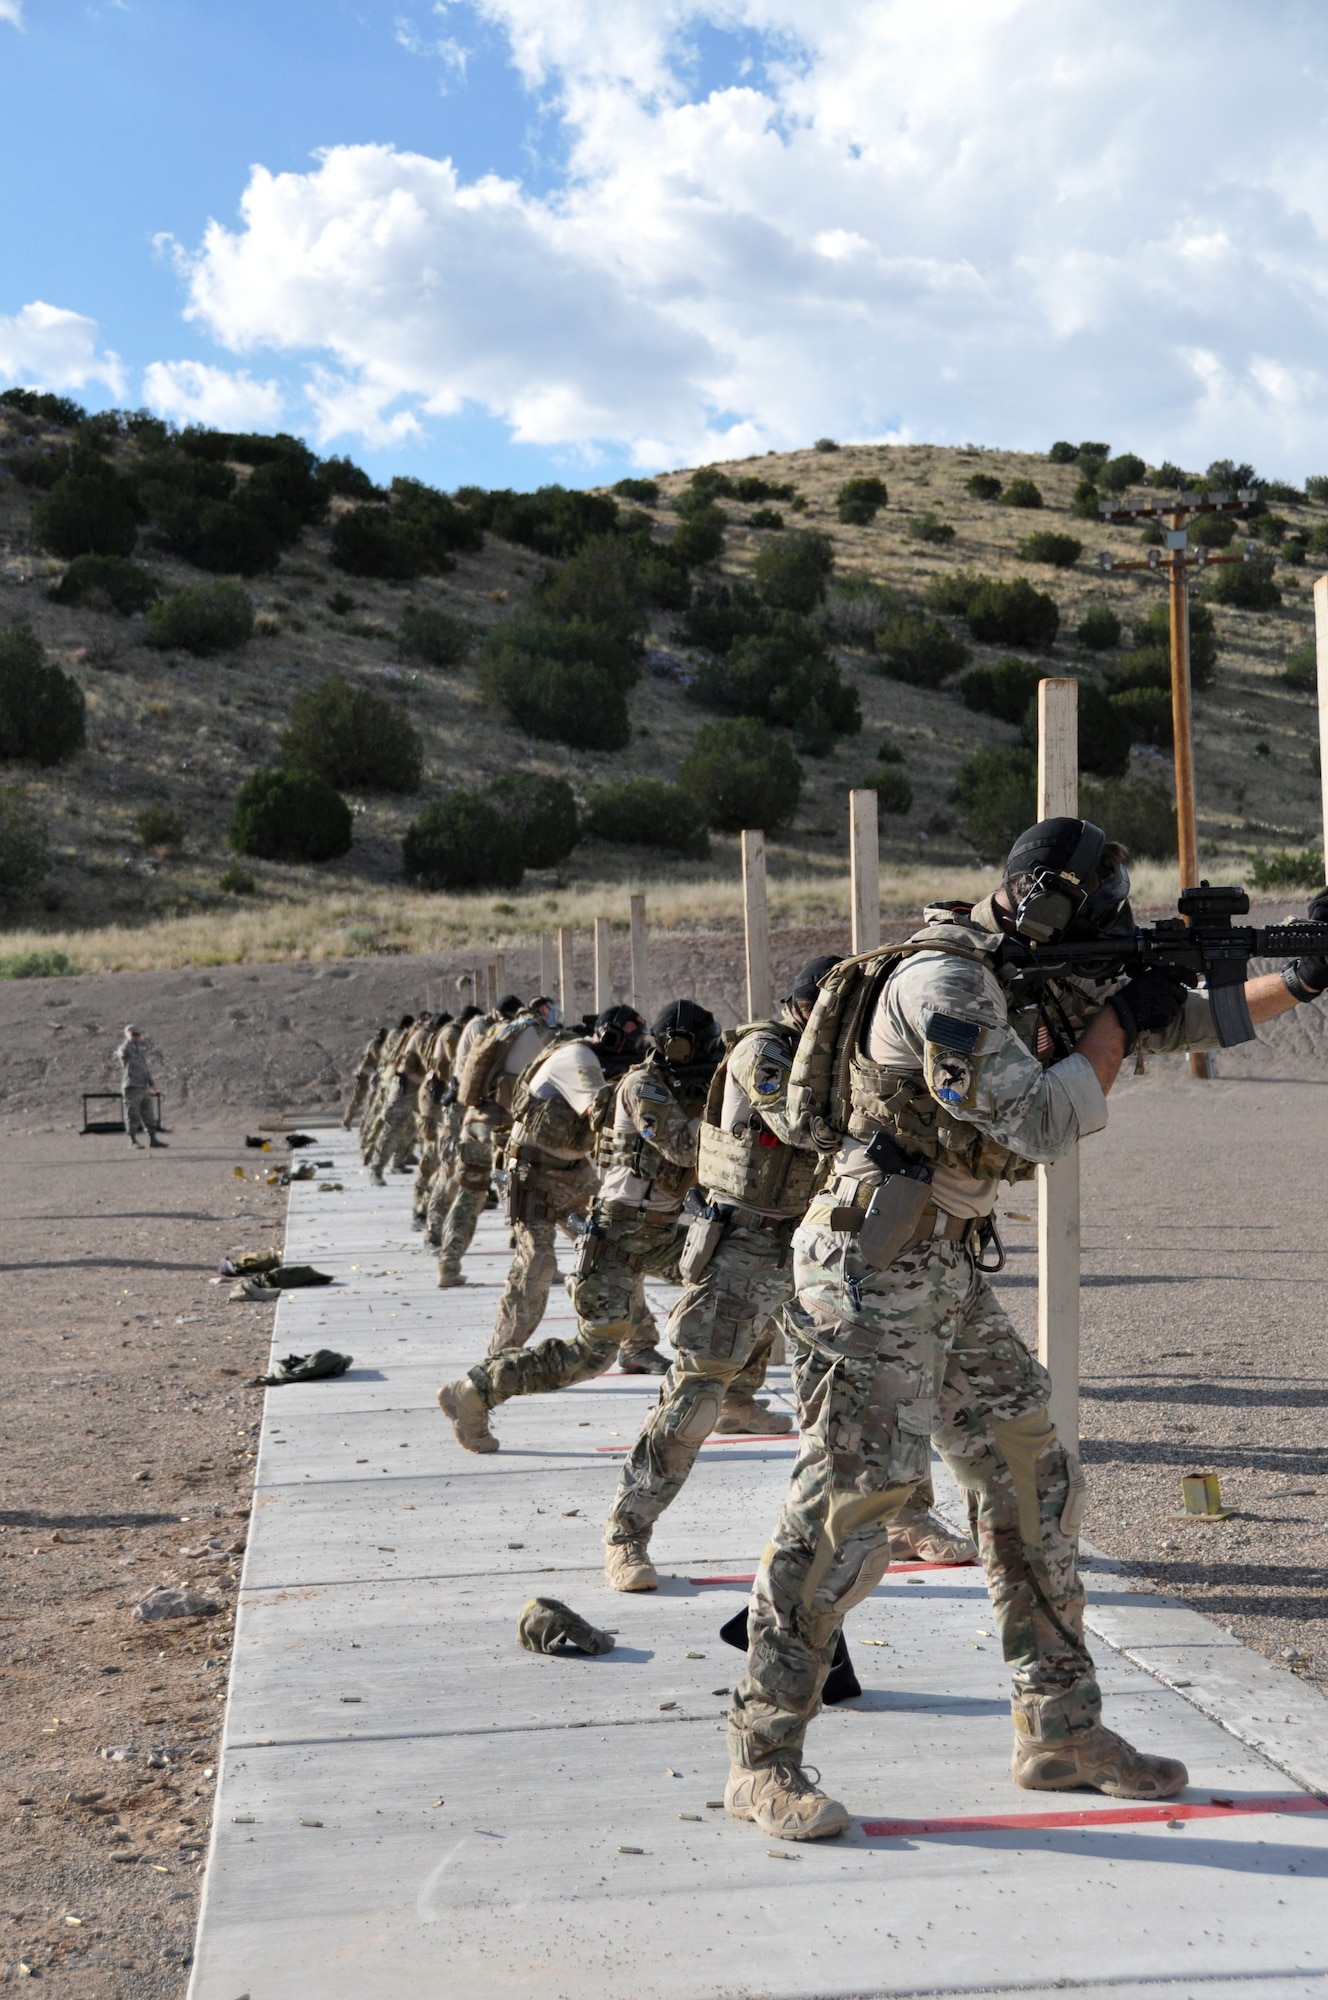 Pararescumen shoot their rifles while wearing gas masks as part of a shooting drill during the 2014 Guardian Angel Rodeo, Kirtland Air Force Base, New Mexico, September 24, 2014. The rodeo, or competition, was a week-long event that tested the PJs on land navigation skills, high-angel rope rescues, survival techniques, medical skills, weapons operations and overall physical endurance. (U.S. Air Force photo/ Tech. Sgt. Katie Spencer) 